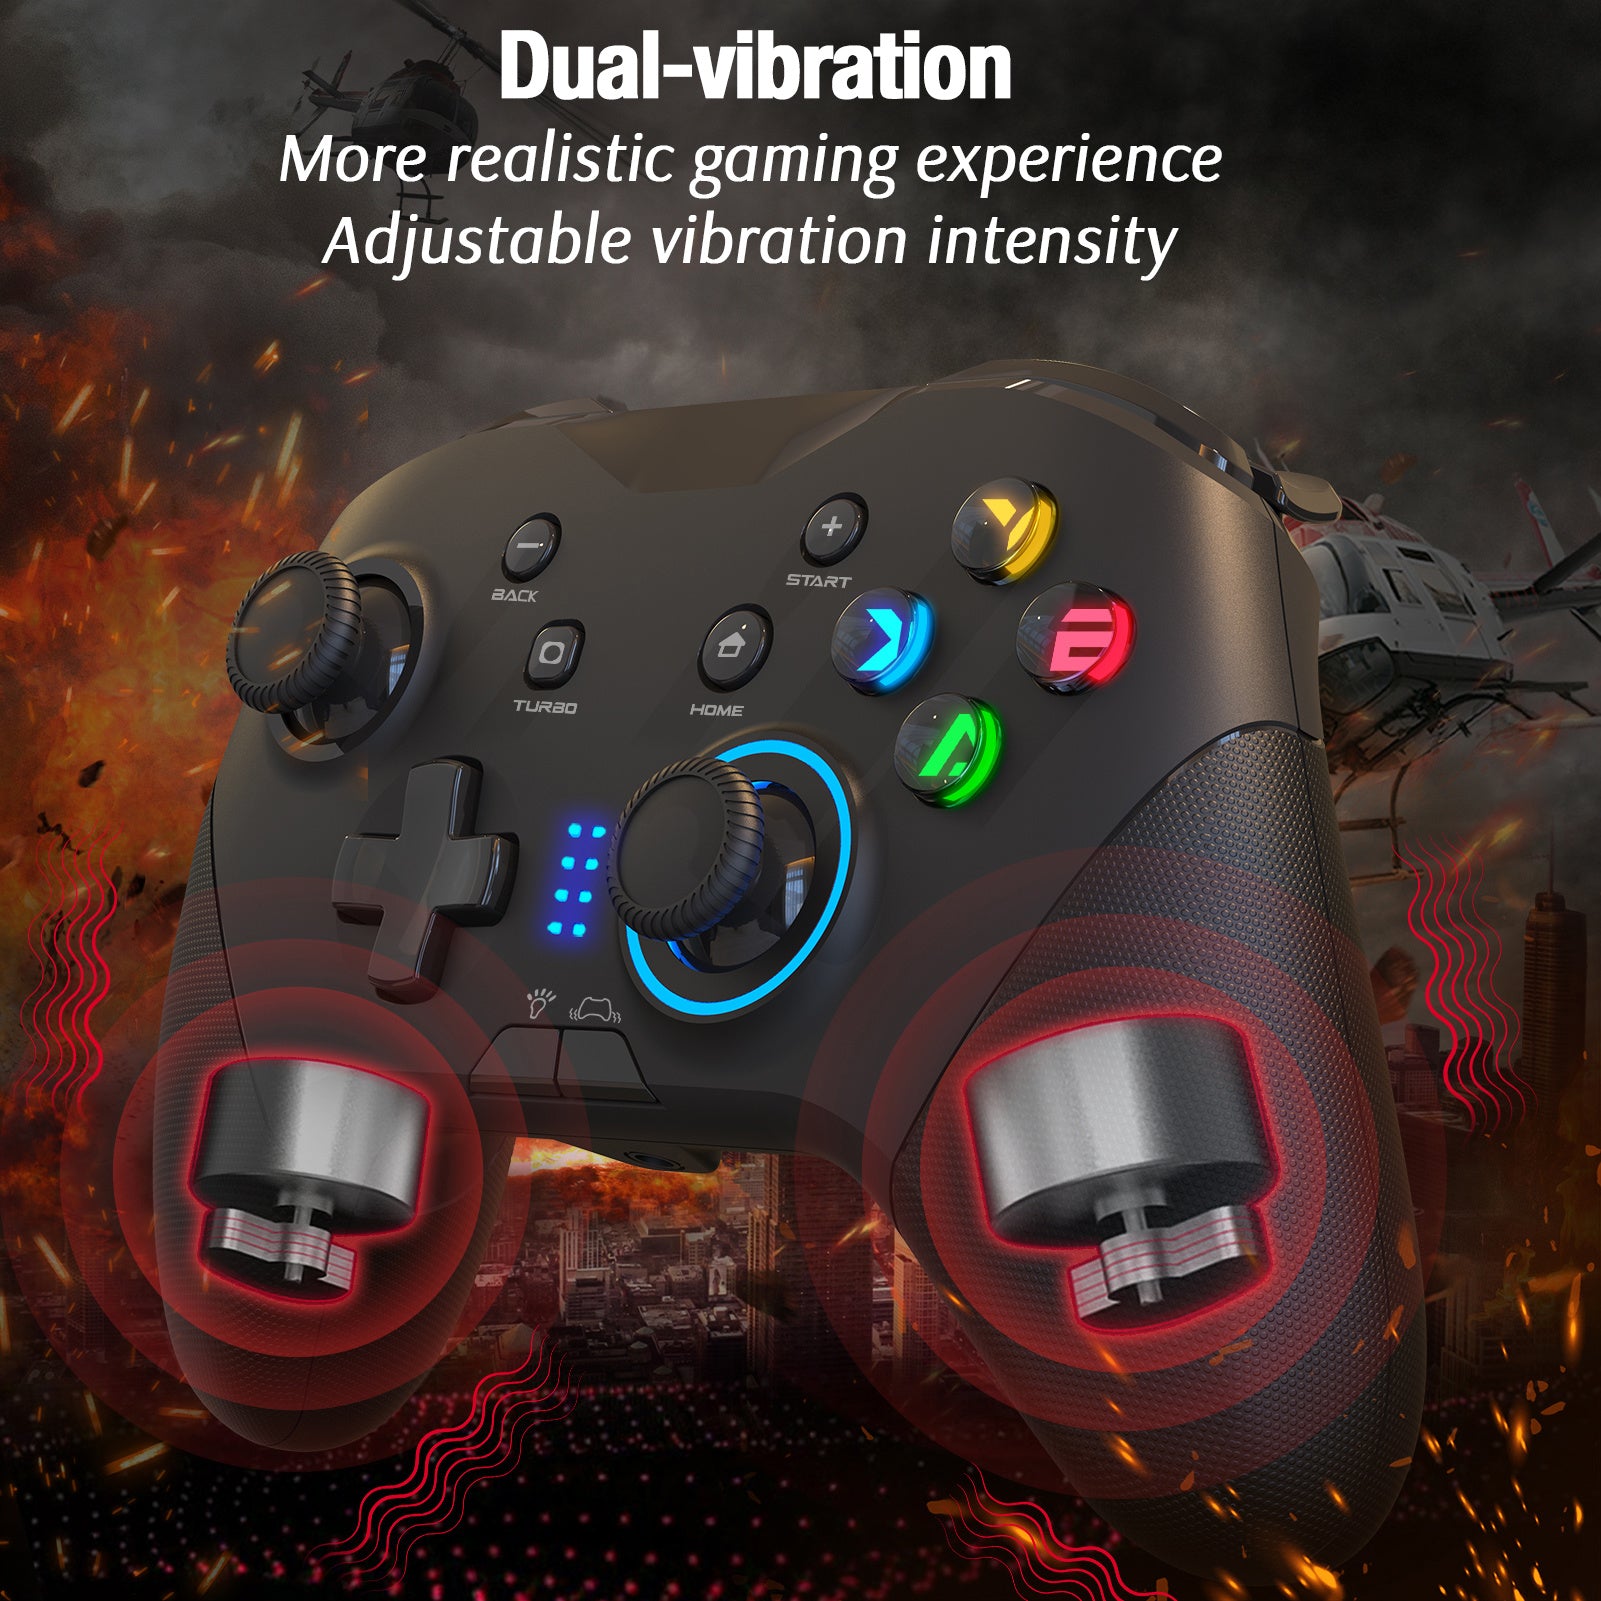 A Dual-Vibration PC Game Controller Compatible Windows 10/8/7 PC Laptop And TV Box with buttons on it, designed for enhanced gaming experience with vibrating motors.